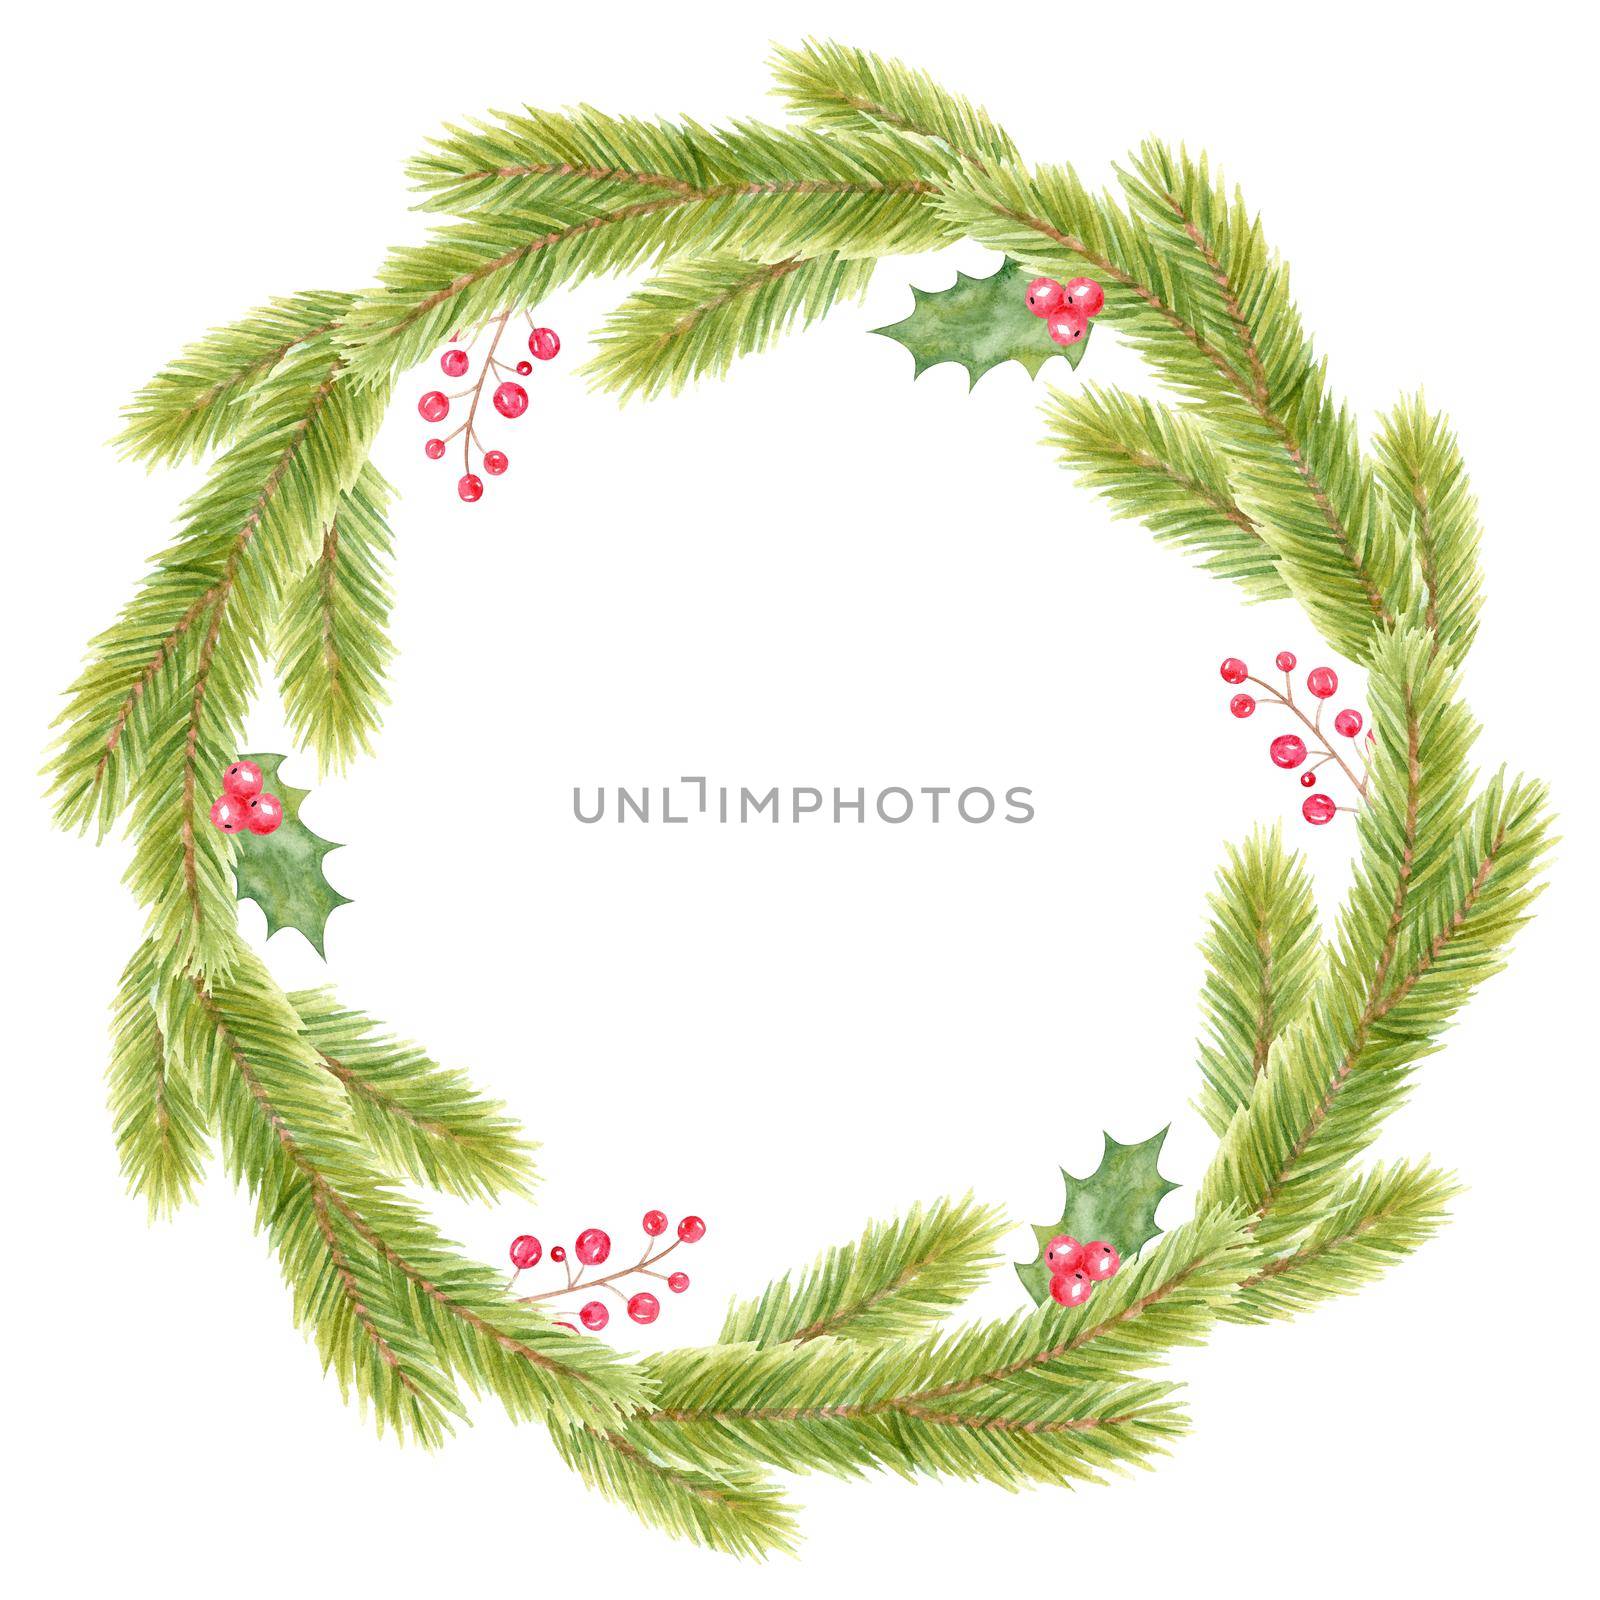 Watercolor Christmas wreath with holly berries isolated on white background by dreamloud